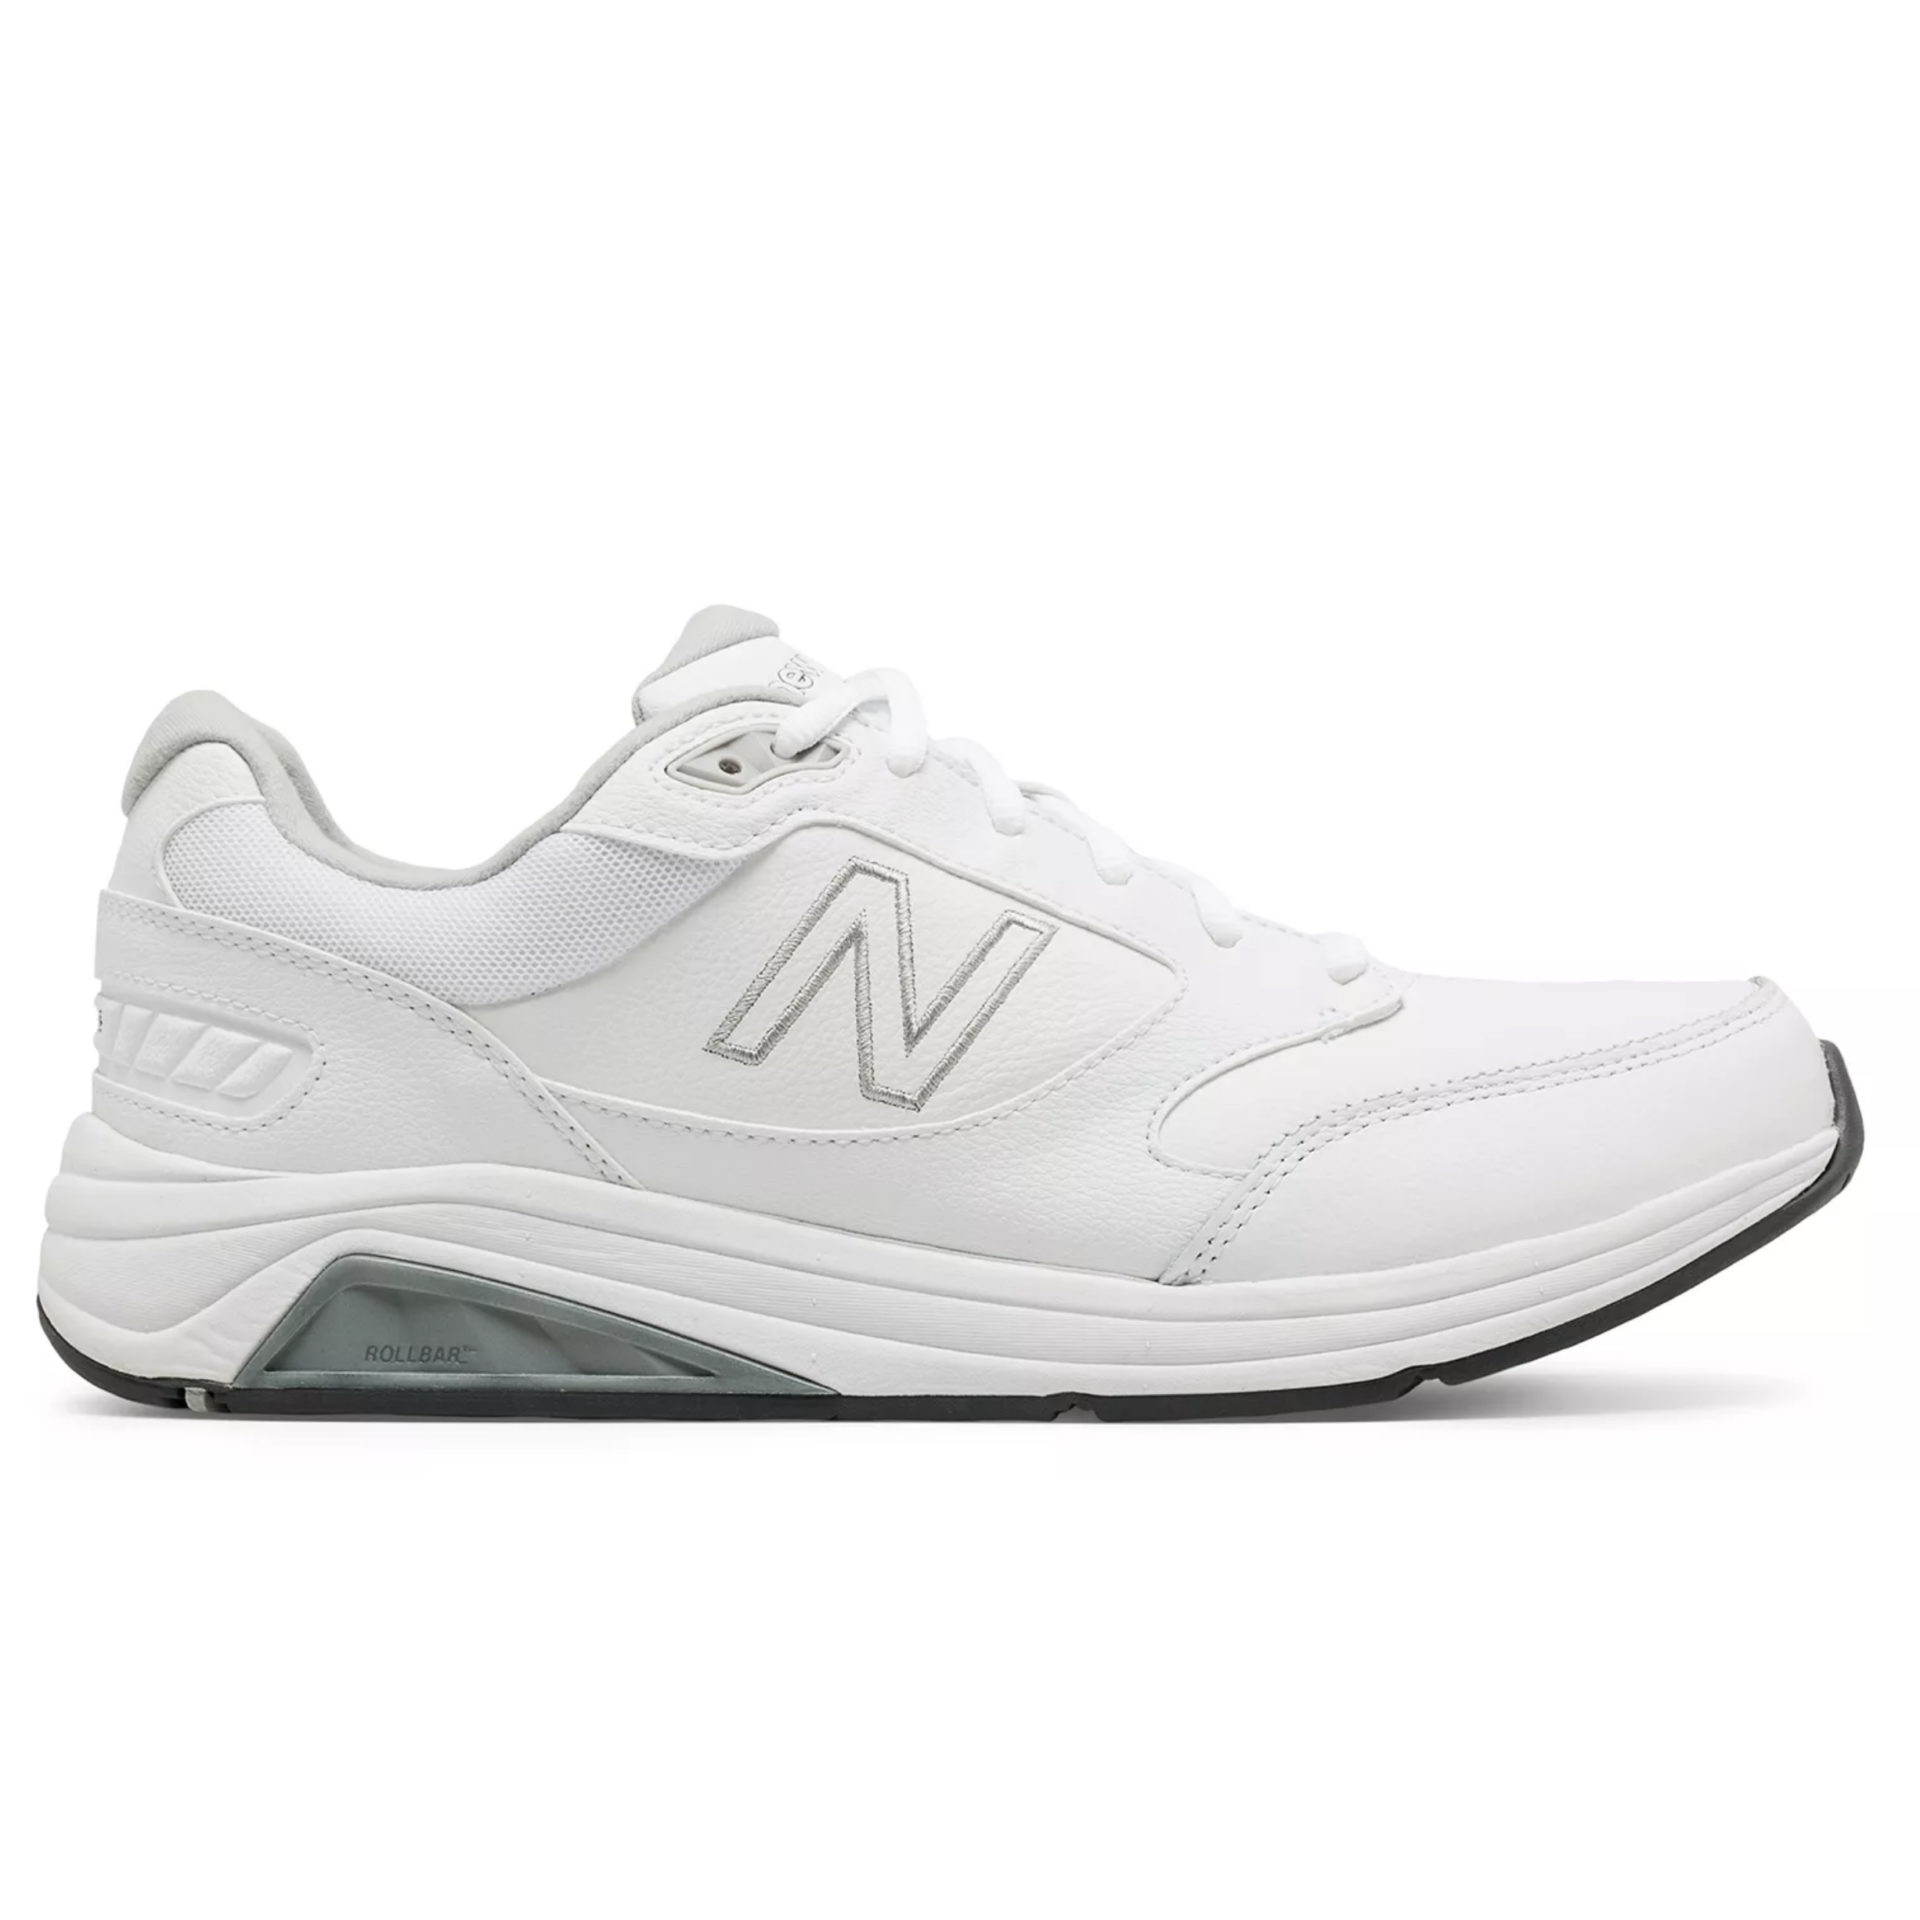 new balance stability shoes mens